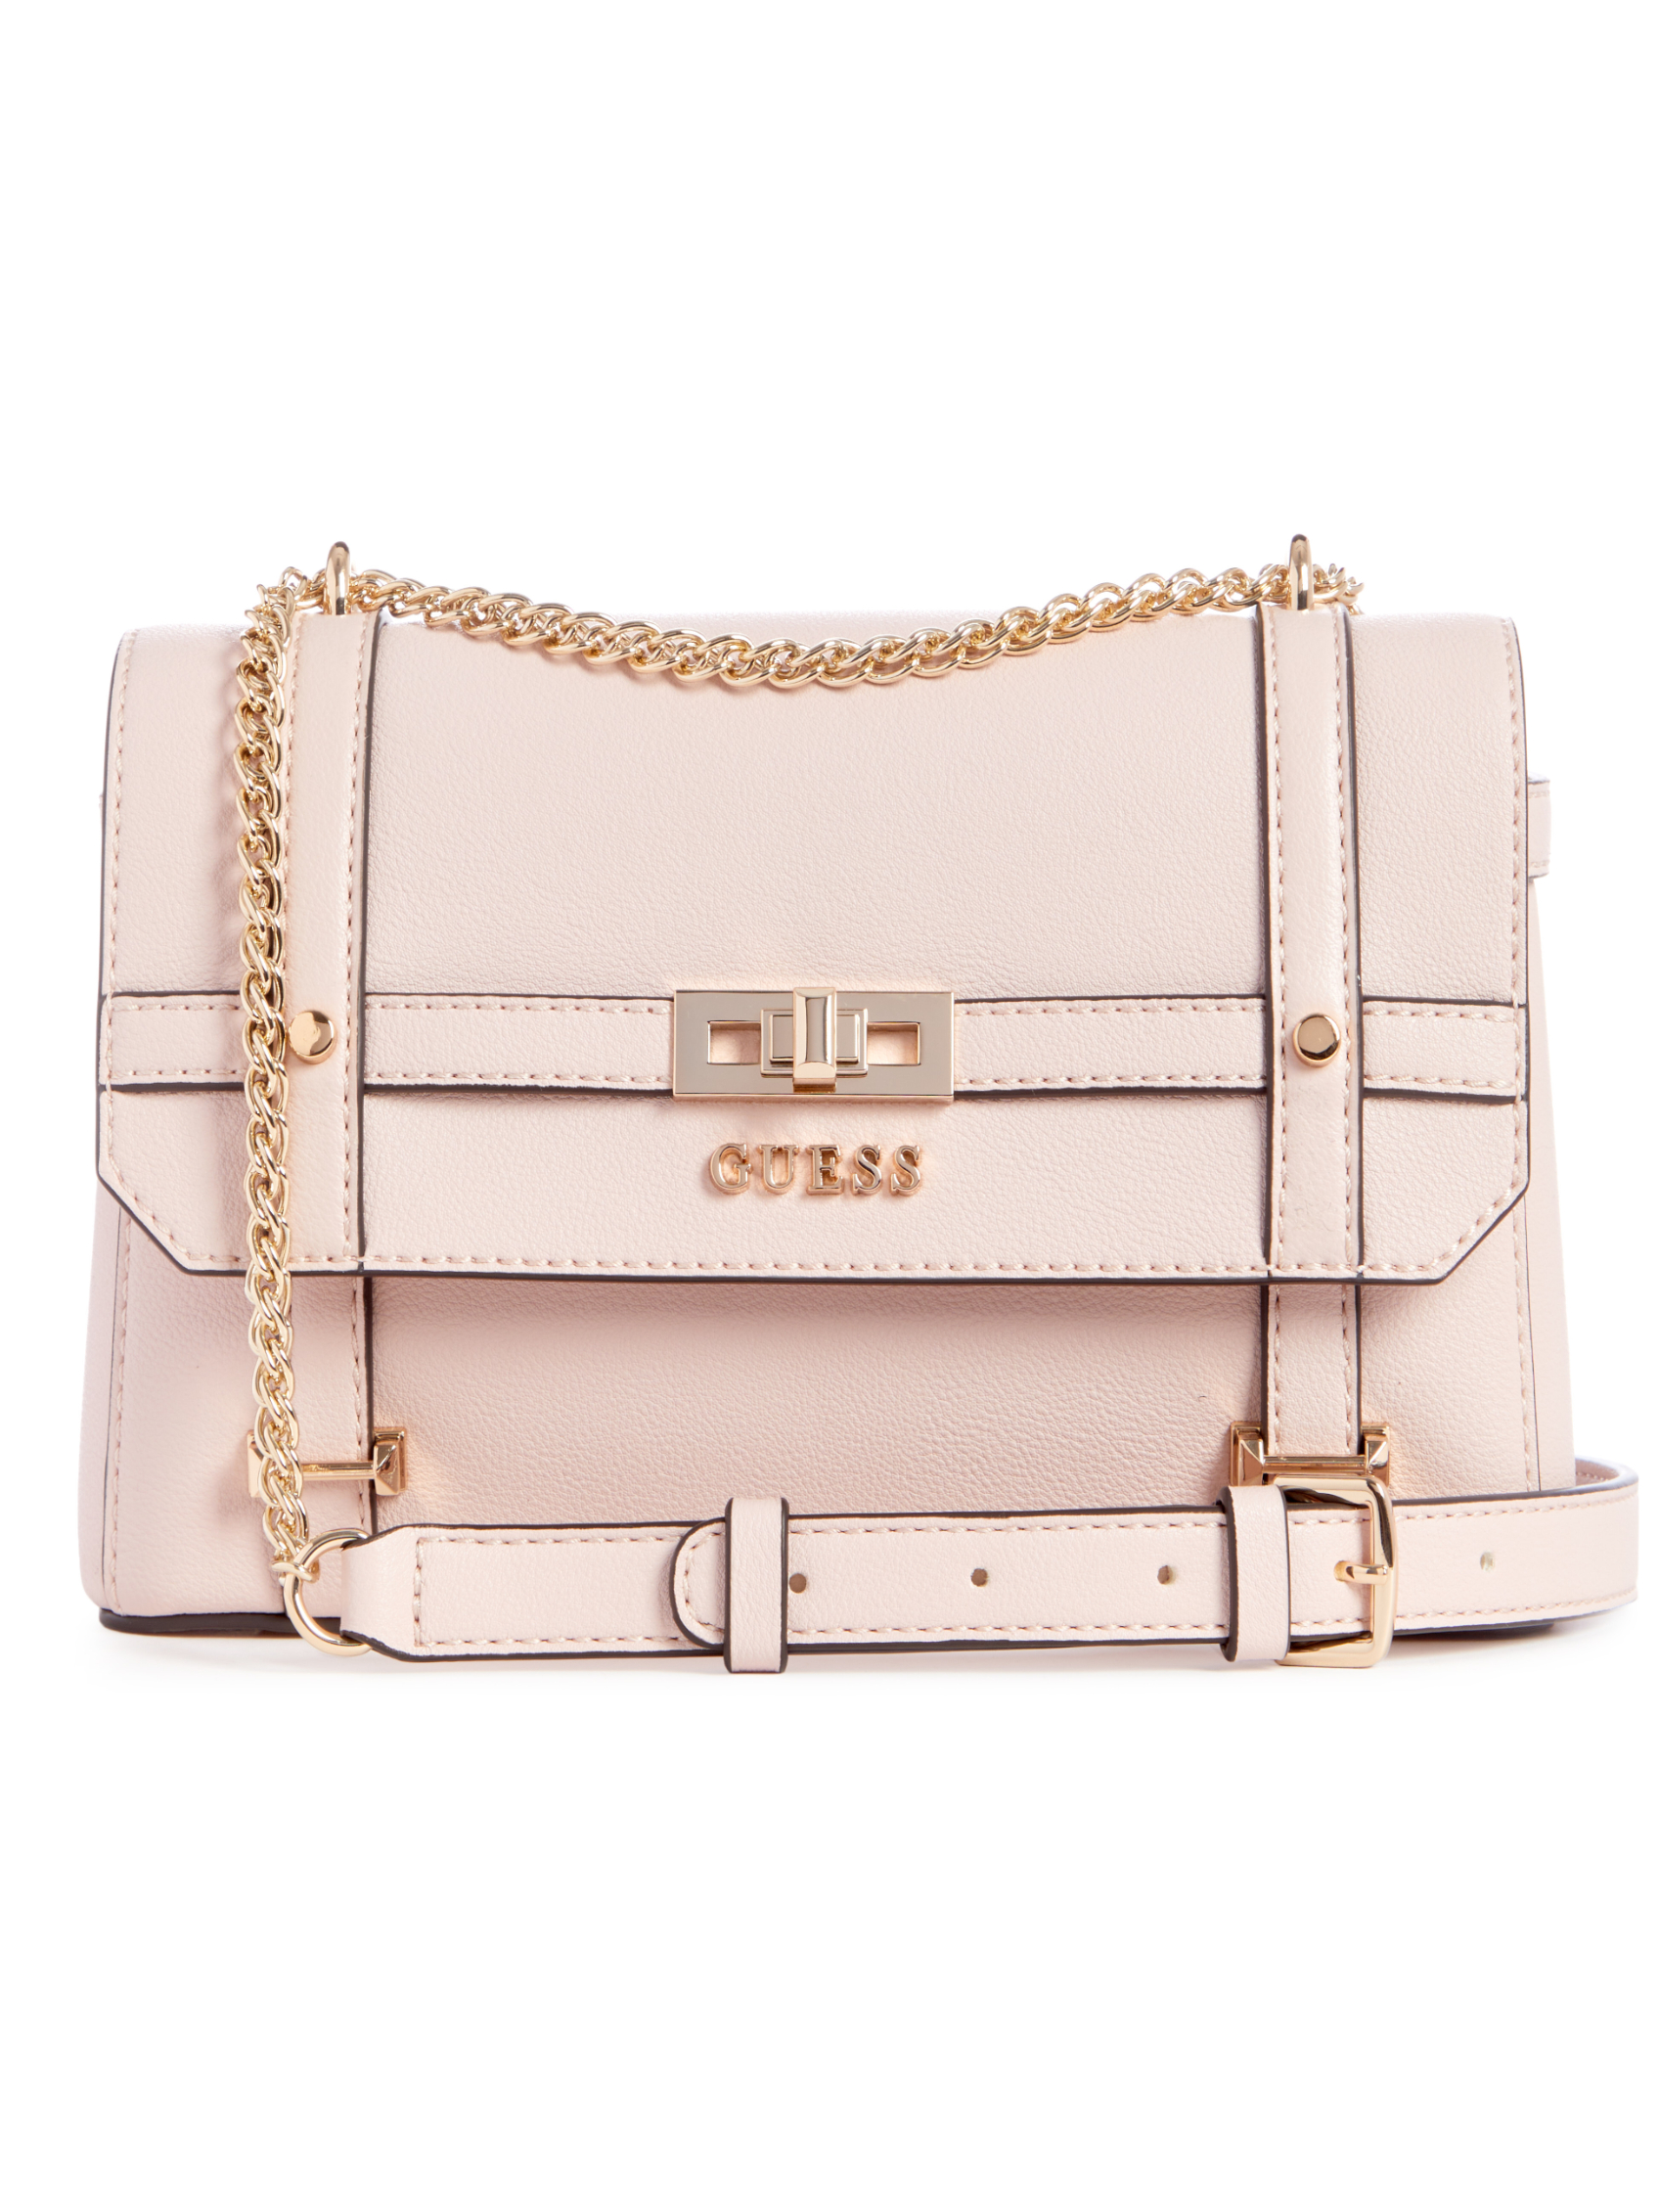 EMILEE CONVERTIBLE CROSSBODY FLAP | Guess Philippines